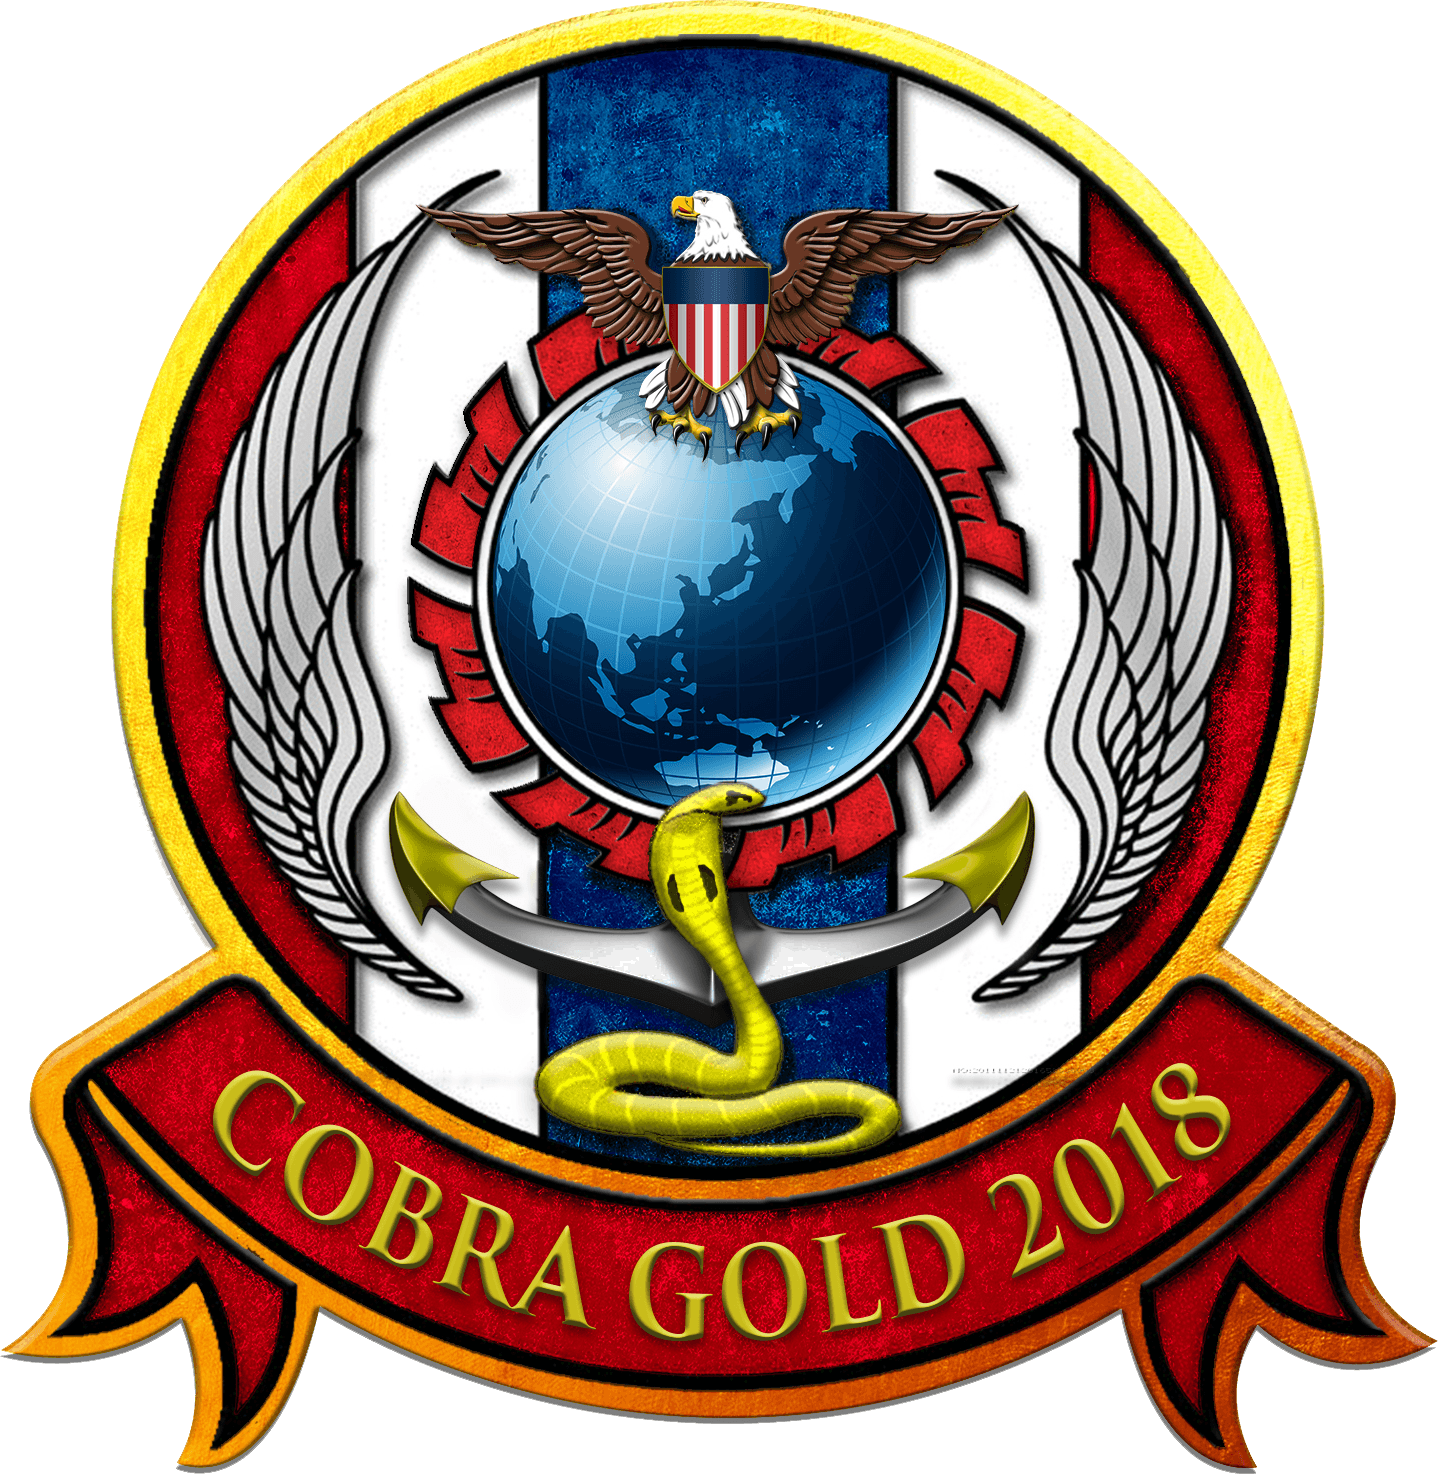 Gold and Red M Logo - File:Exercise Cobra Gold 2018 insignia (180123-M-JU566-001).png ...